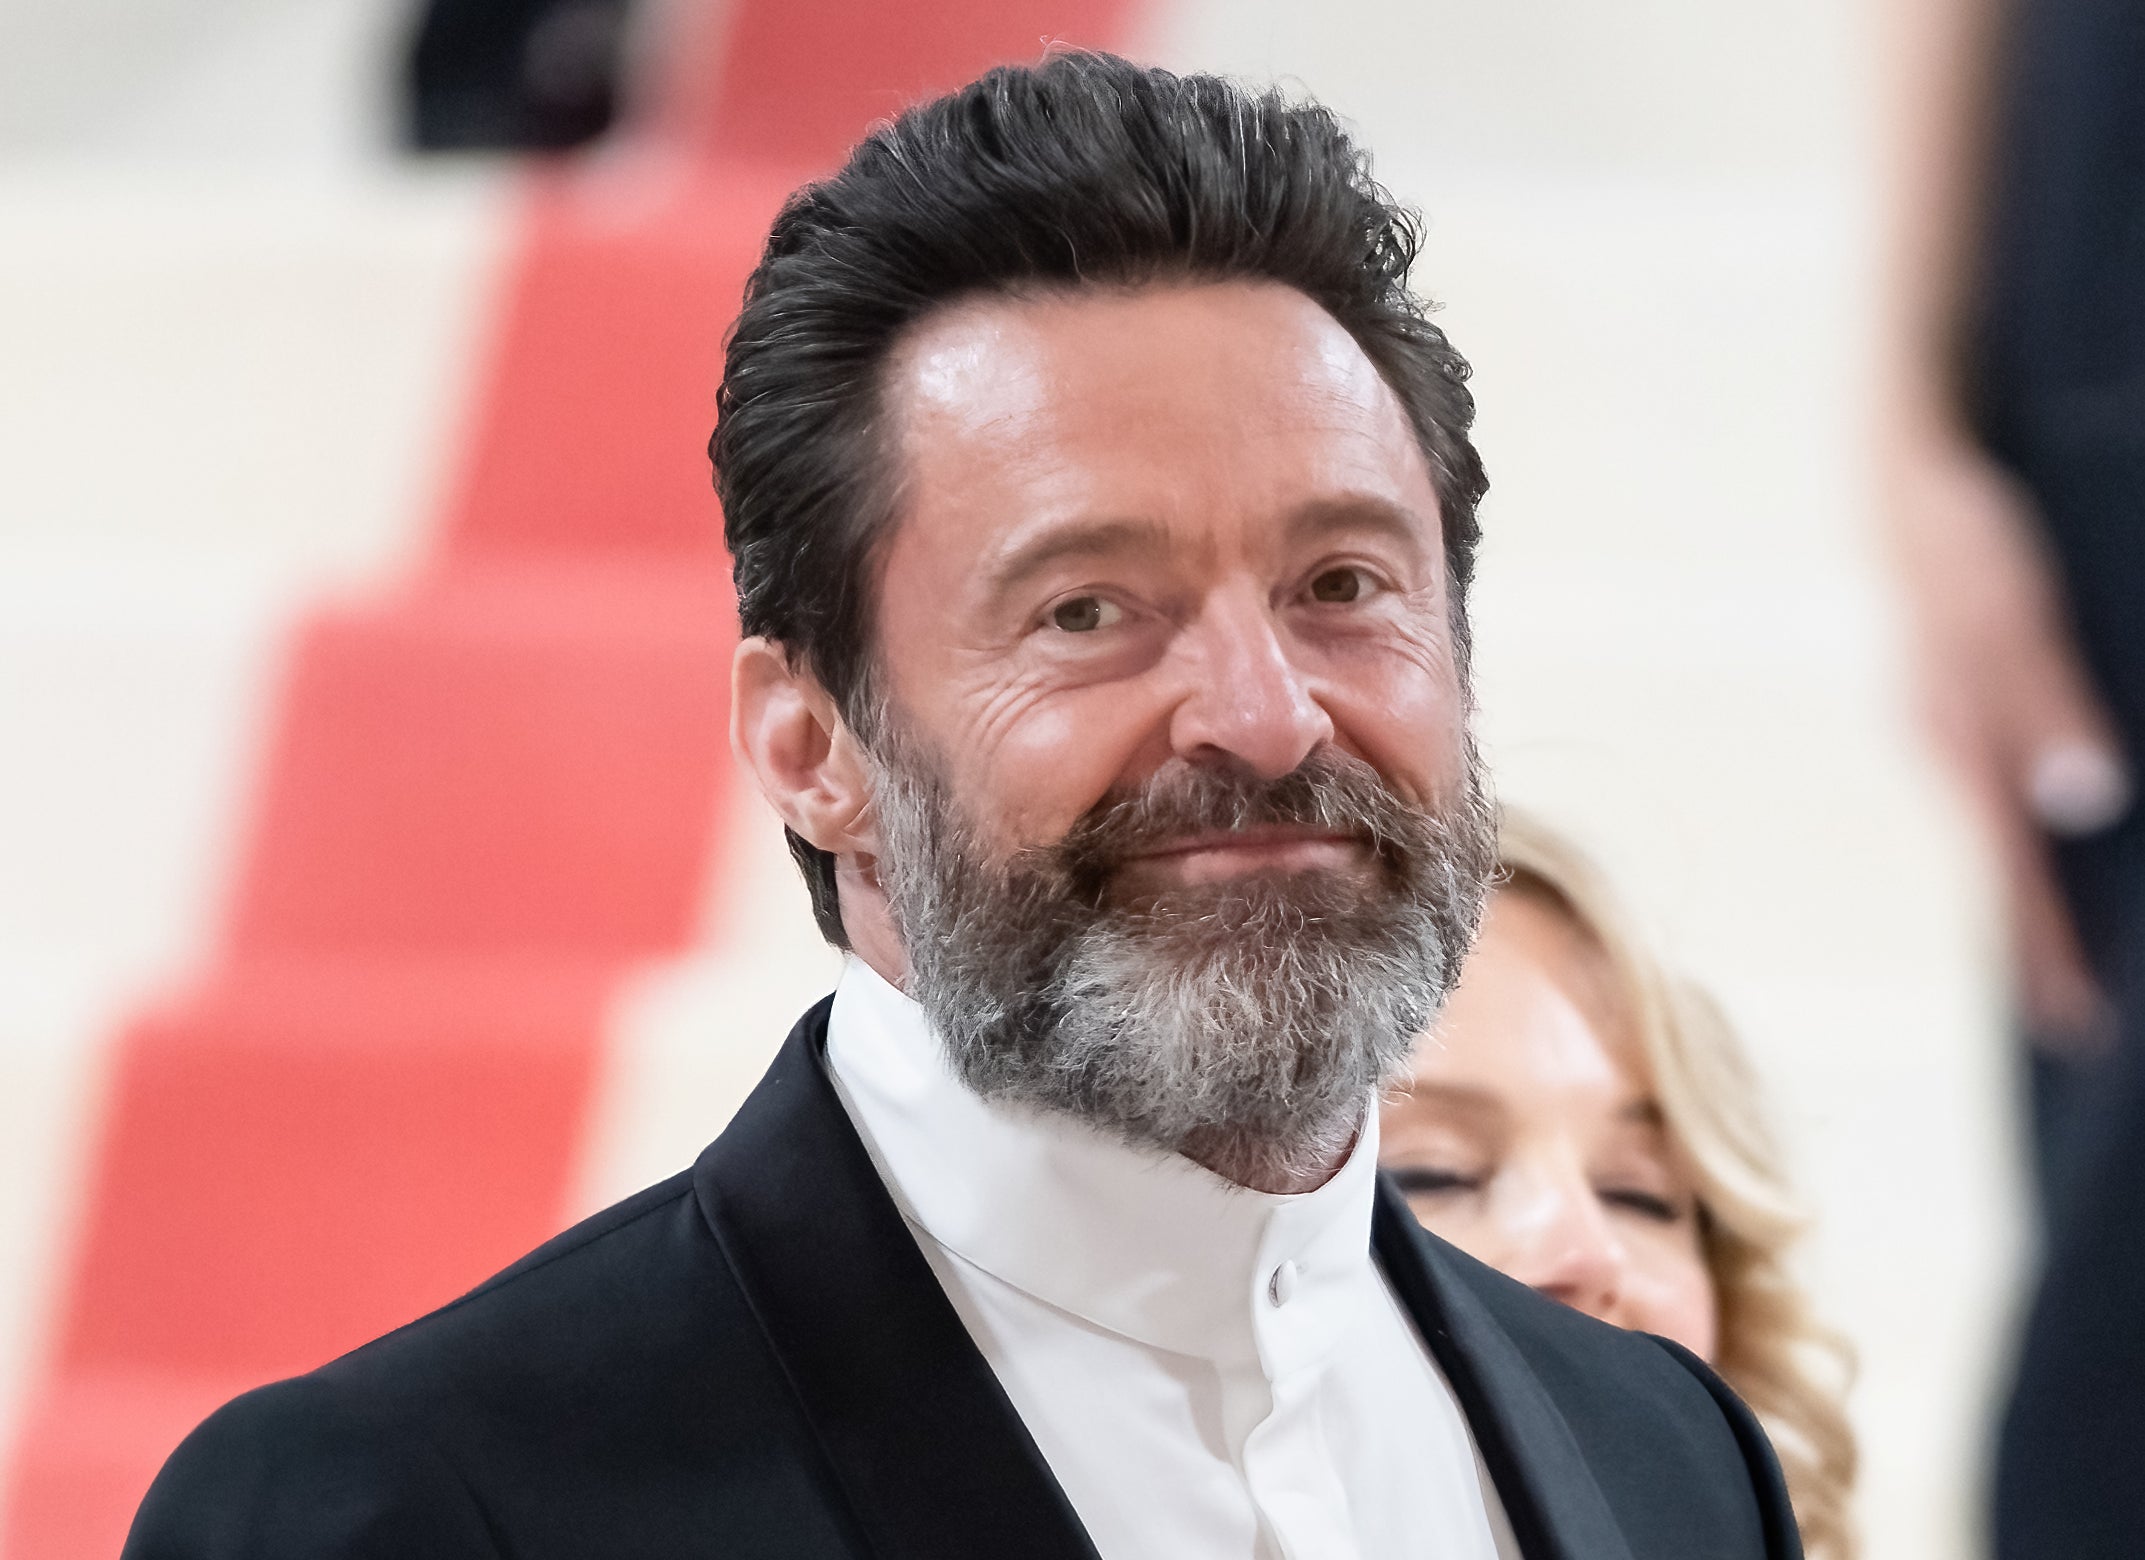 Hugh Jackman smiling as he attends a red carpet event